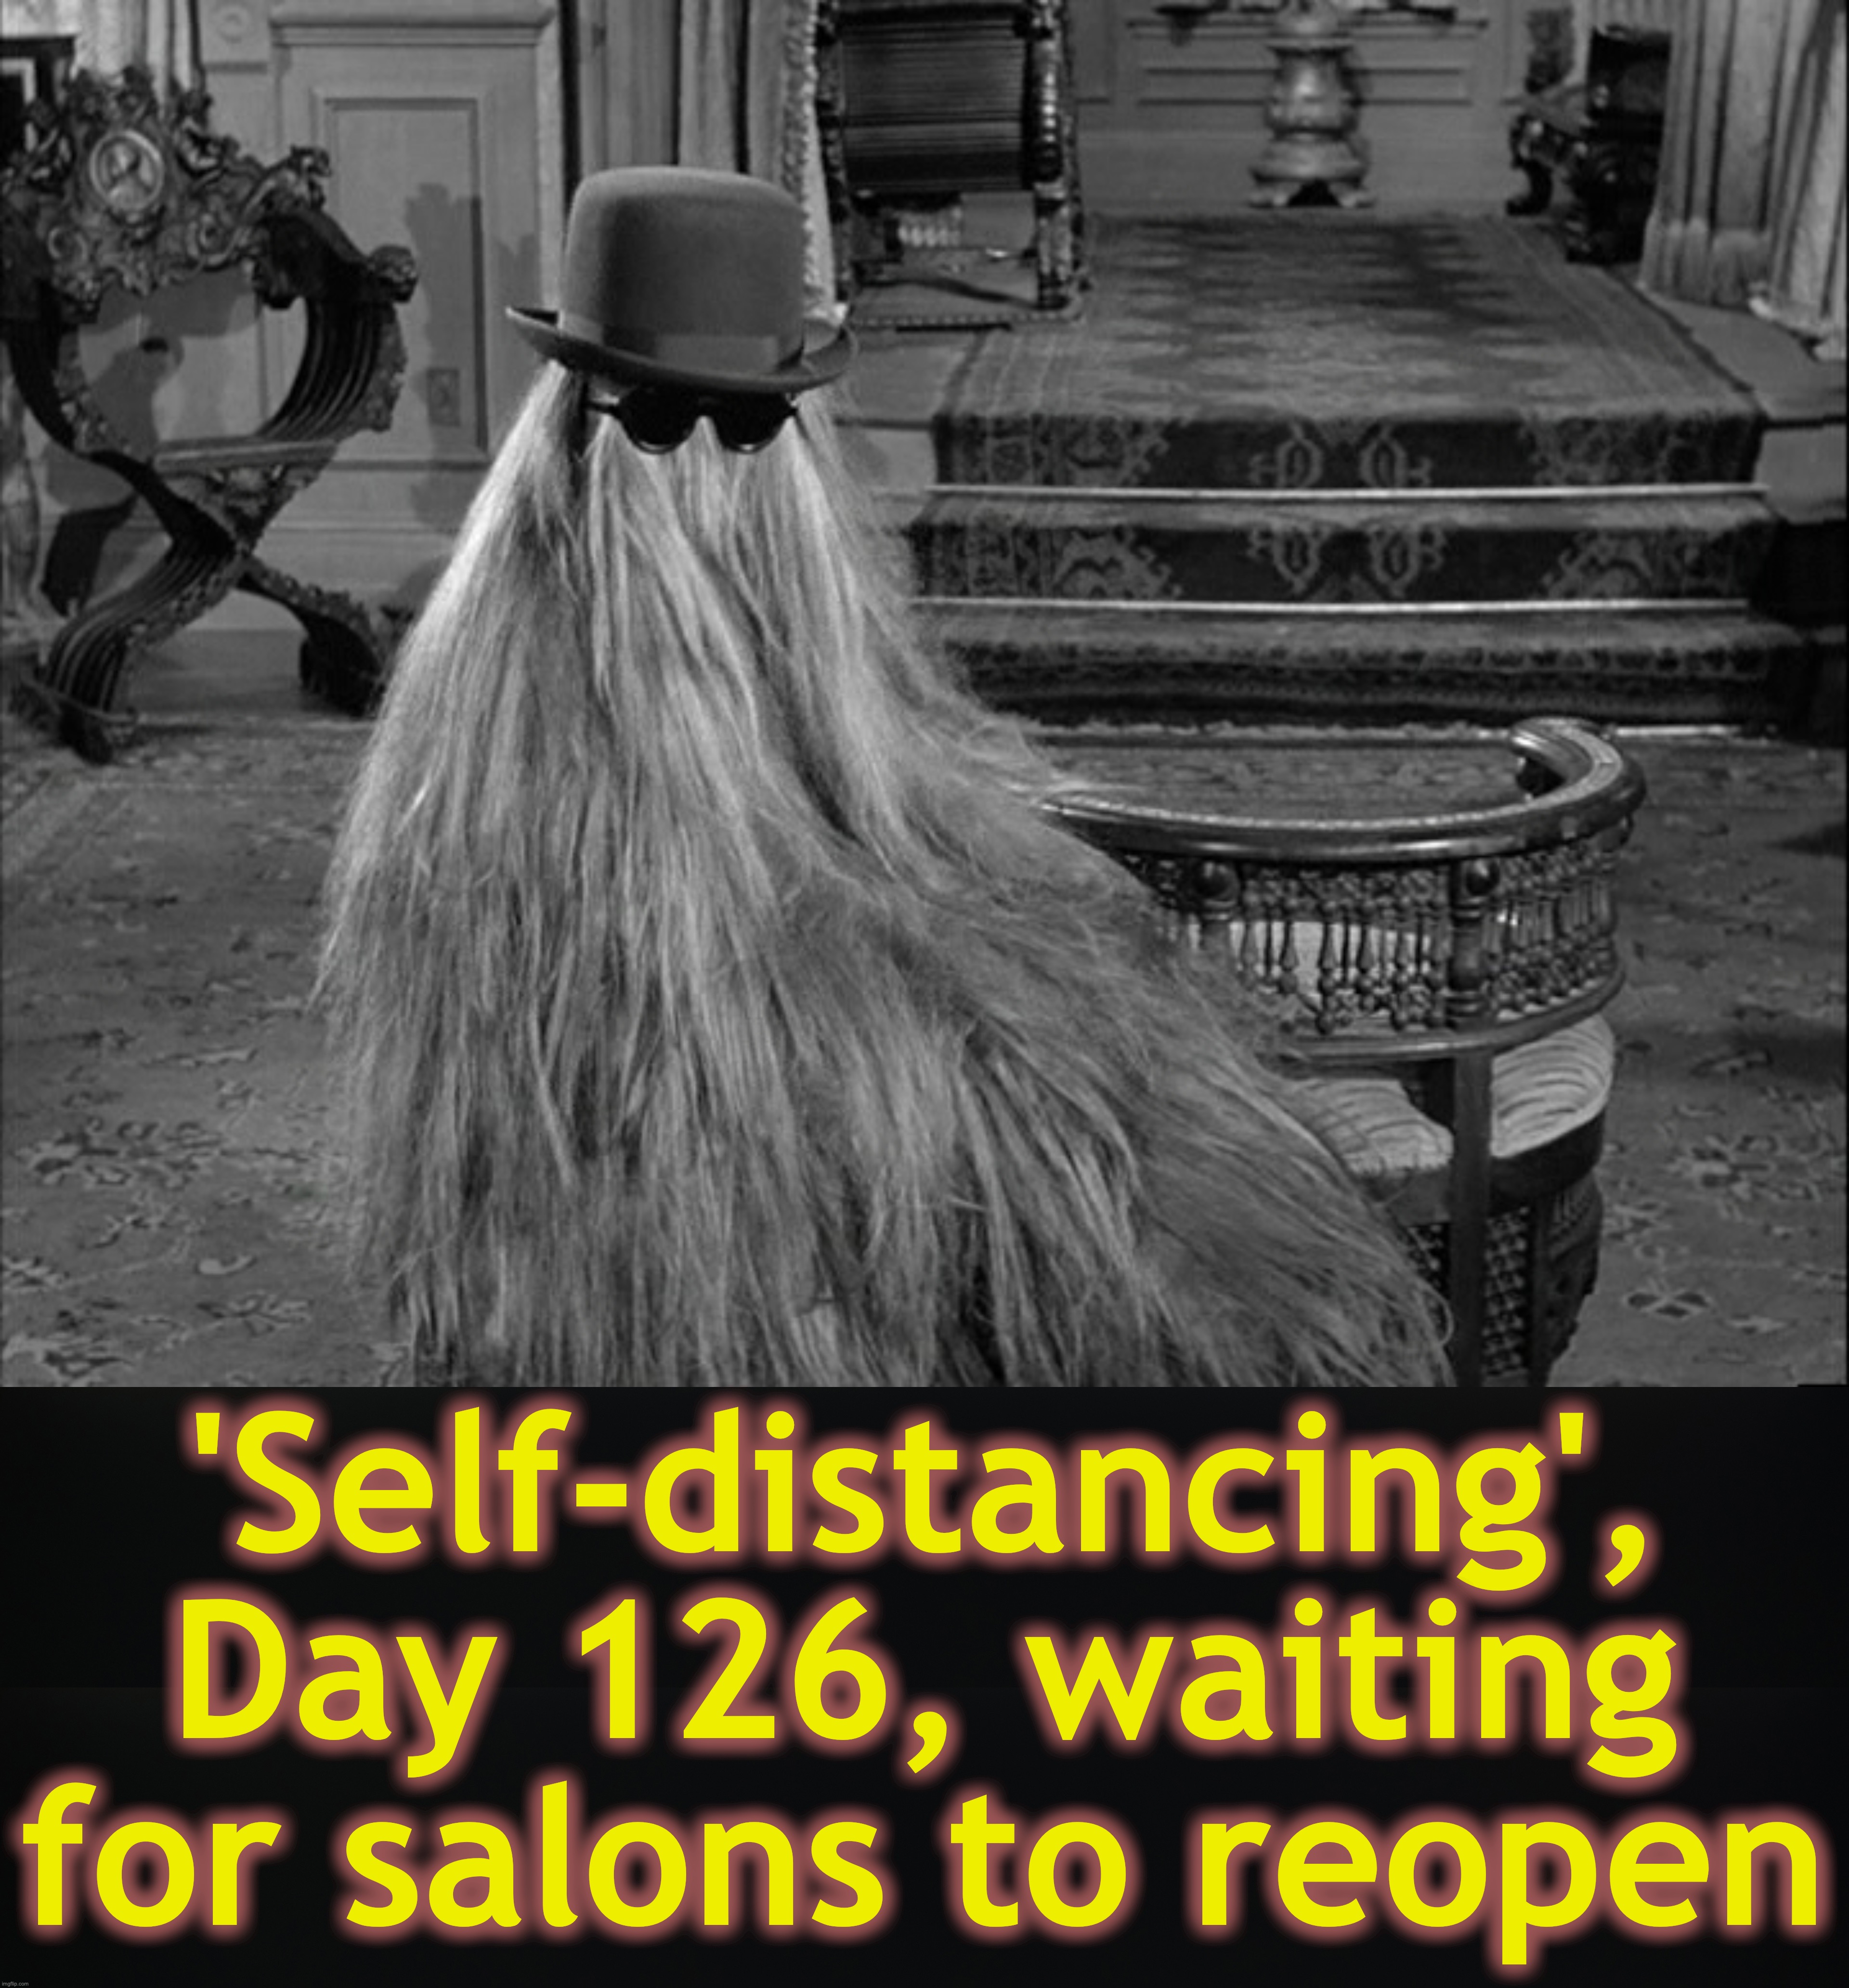 using a lot of conditioner lately | 'Self-distancing', Day 126, waiting for salons to reopen | image tagged in covid19,haircut,coronavirus,isolation,lockdown,shutdown | made w/ Imgflip meme maker